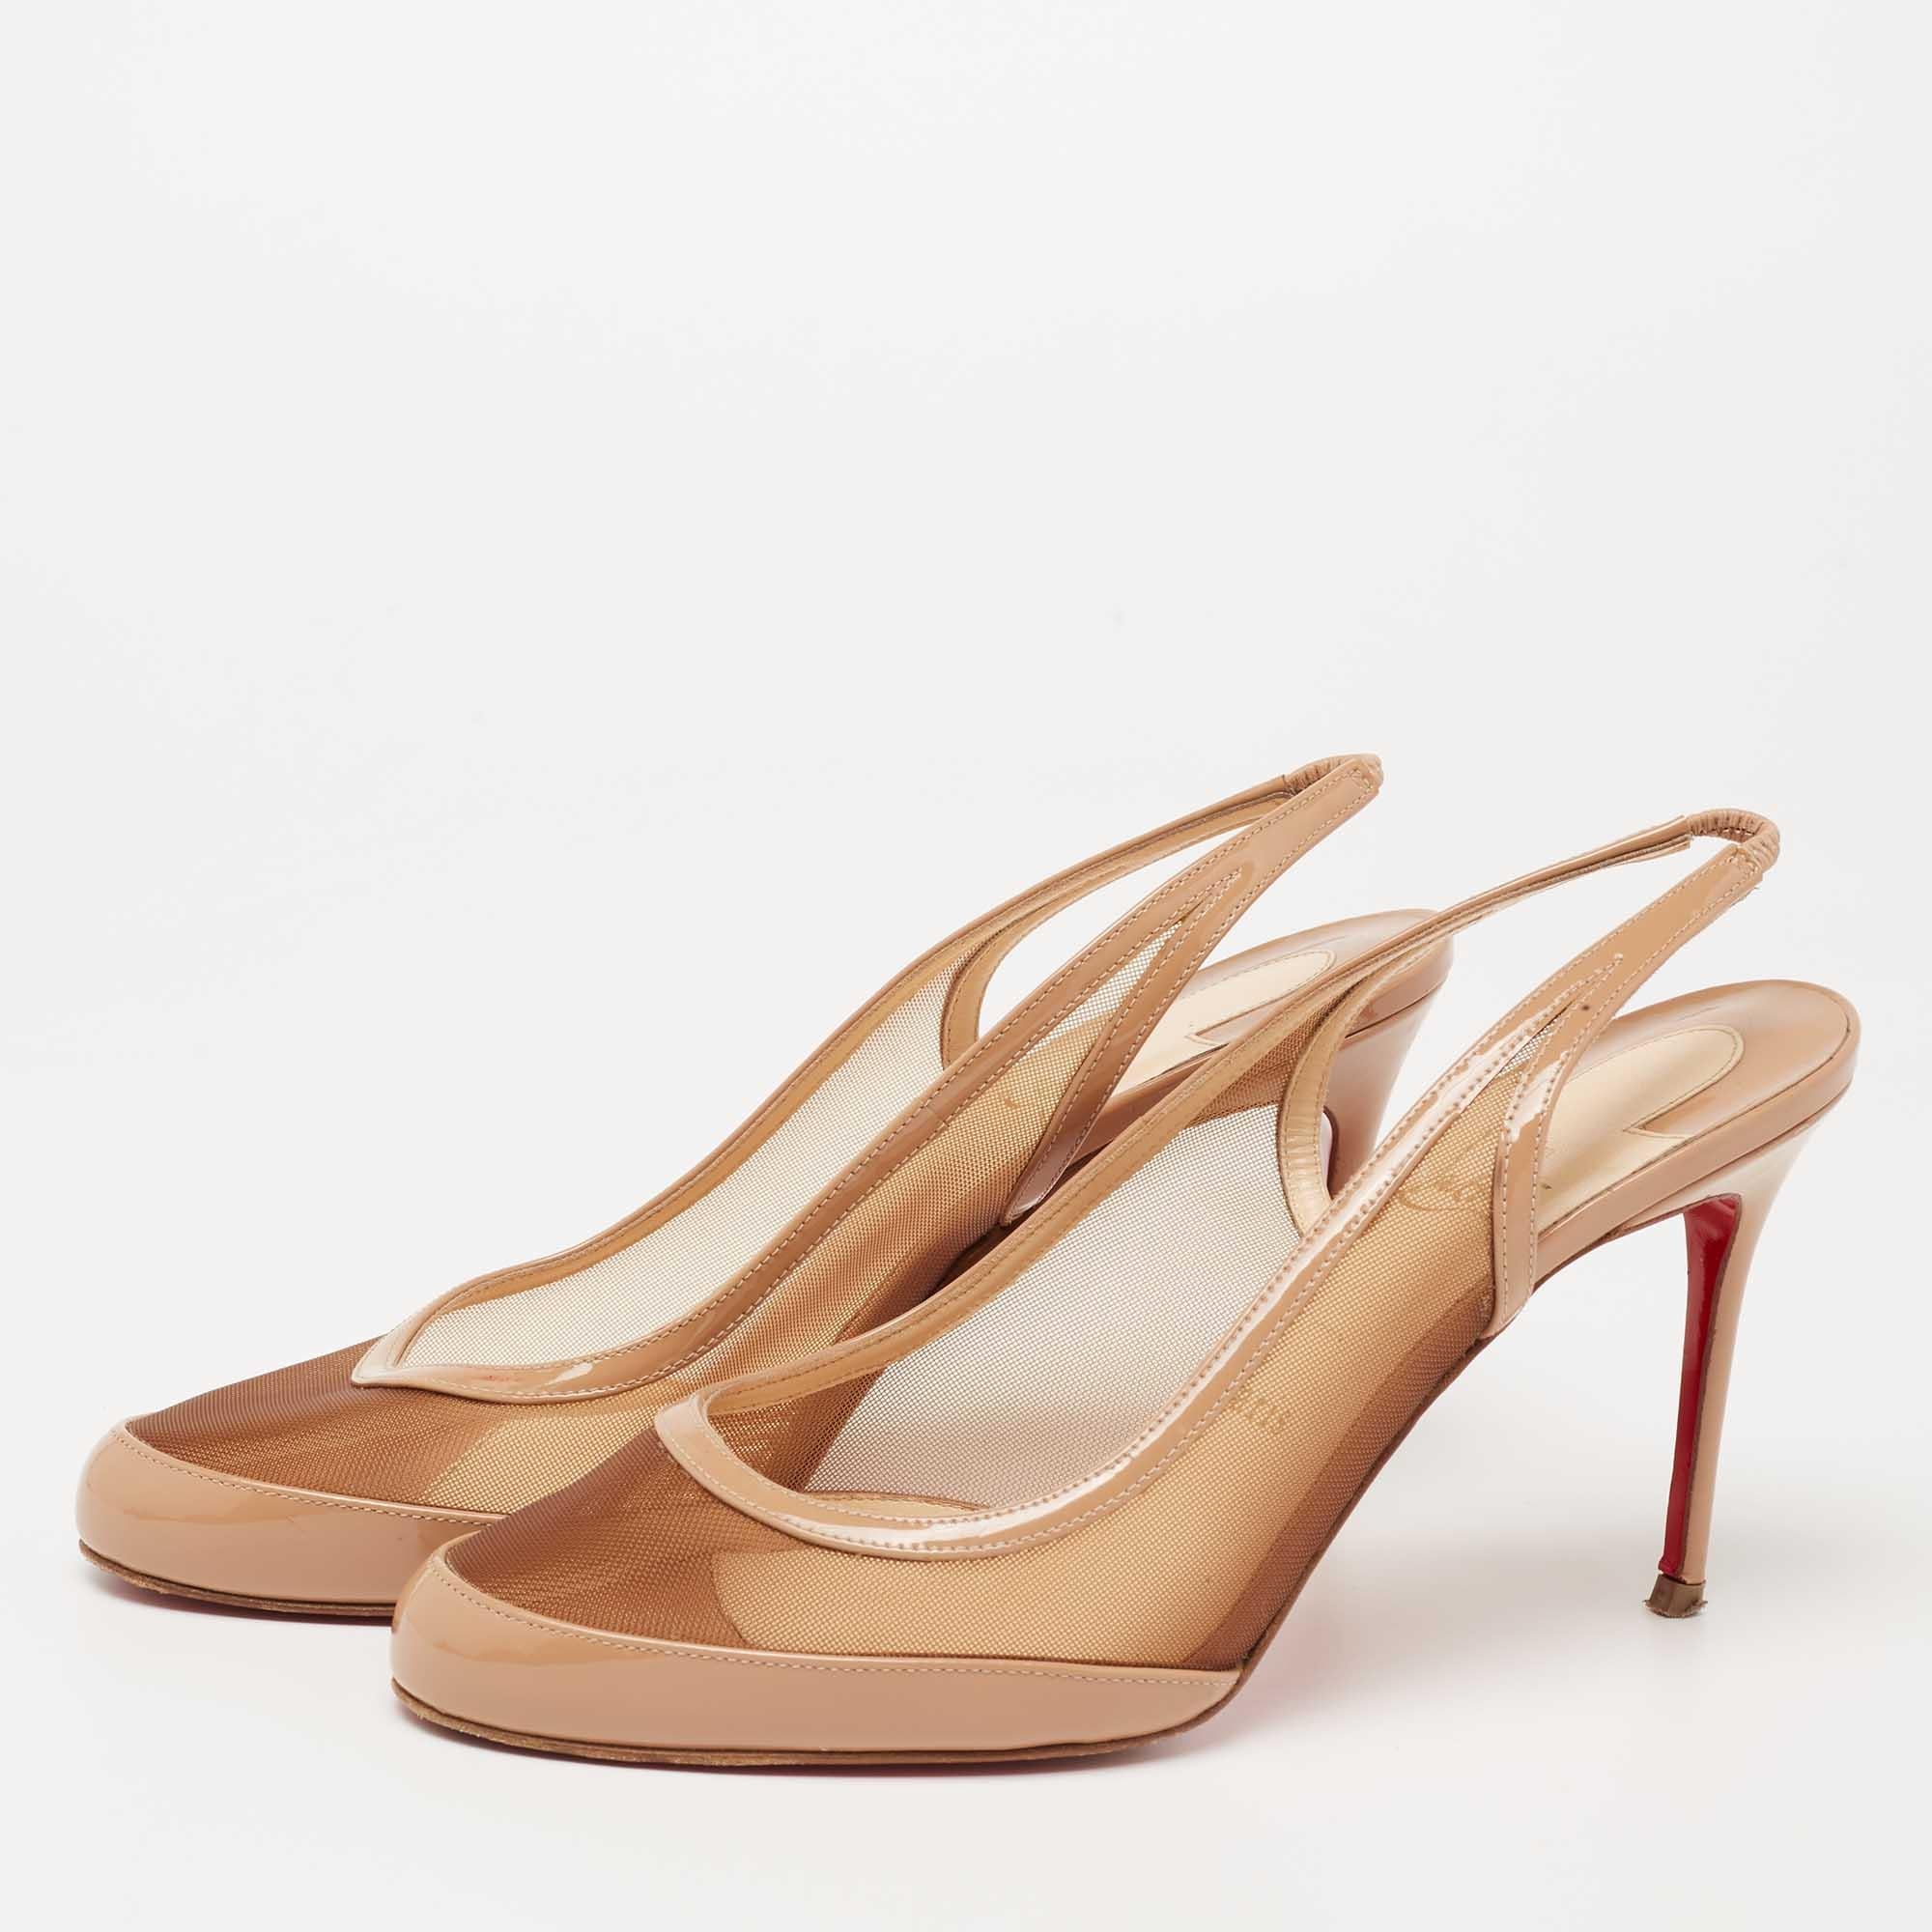 A simple rounded-toe slingback sandal covered in beige patent leather & mesh and elevated on a slim heel brings out the charm of this Christian Louboutin design. The shoes are carefully fashioned to ensure every step you take is comfortable and